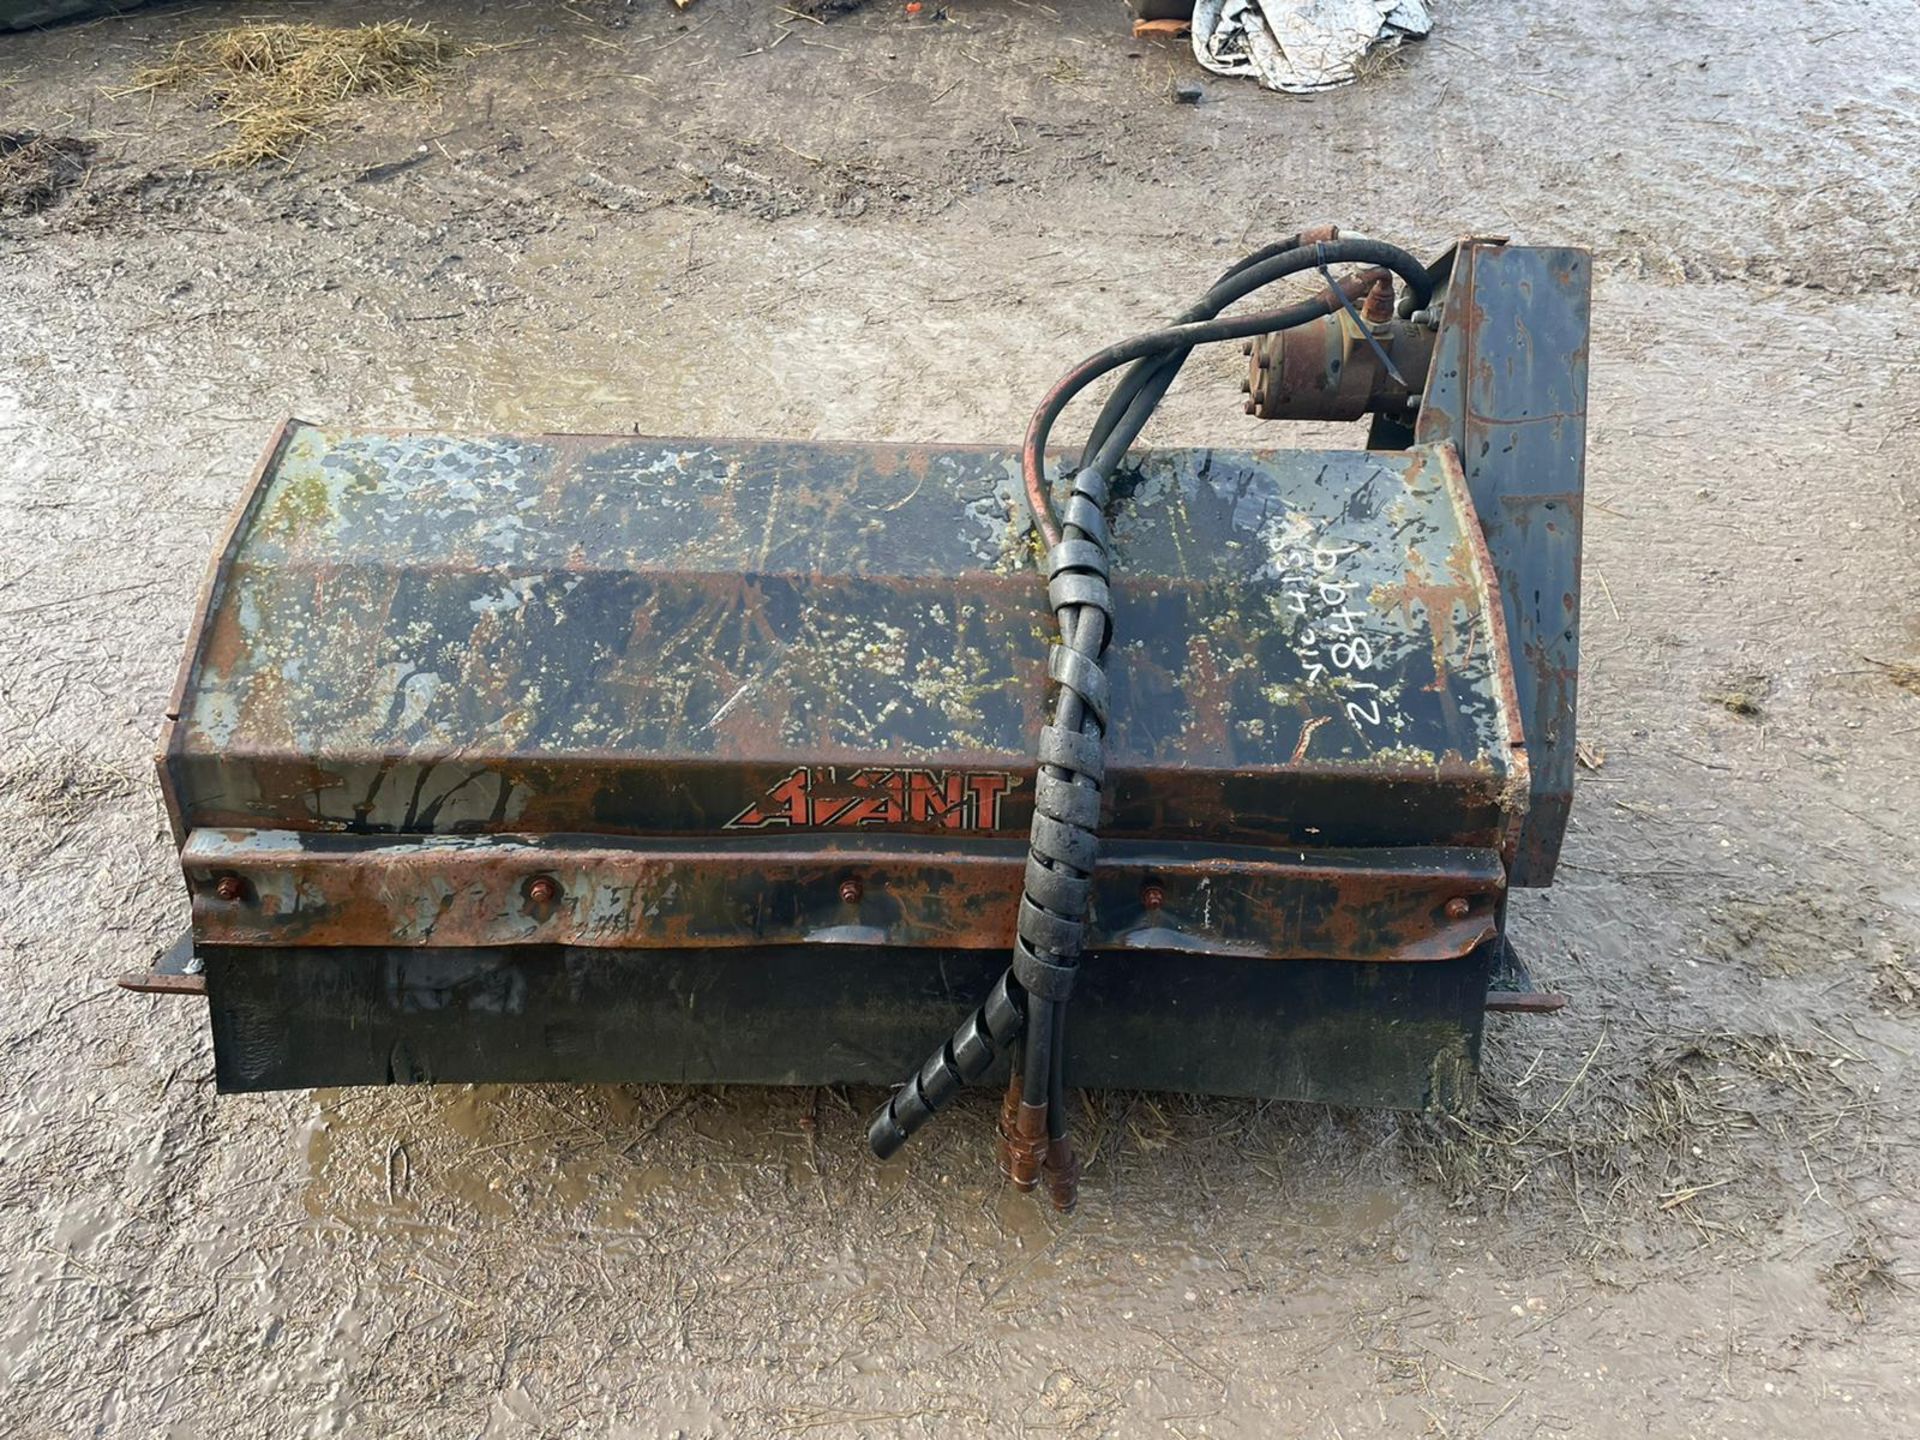 Avant Rotavator, Came Of An Avant Skidsteer Loader, Hydraulic Driven, Good Condition *Plus VAT*